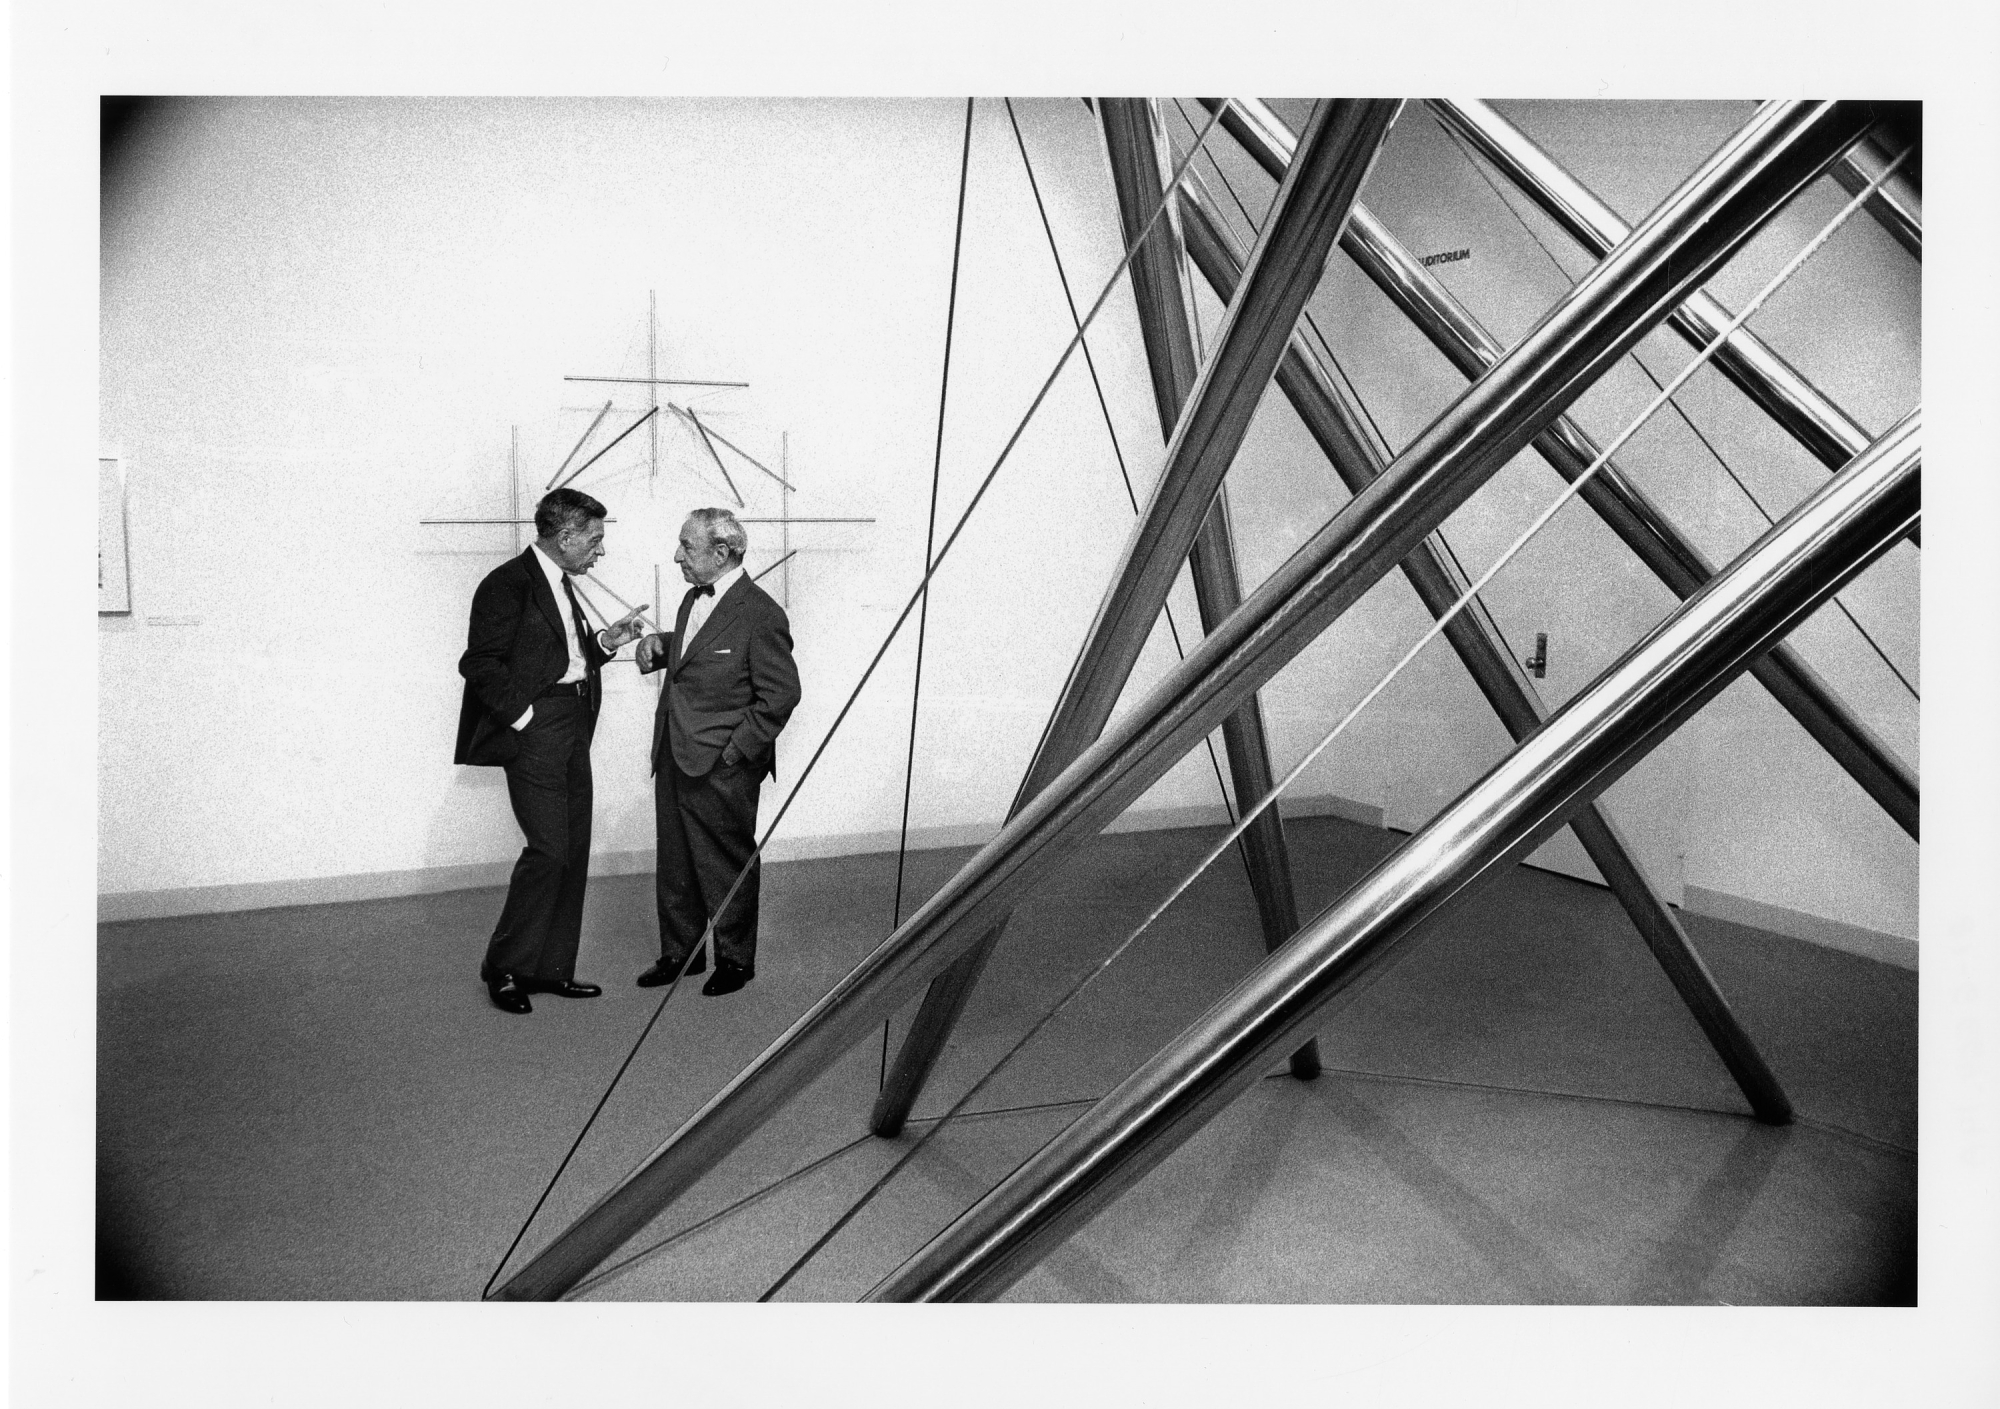 Abram Lerner and Joseph H. Hirshhorn in a Sculpture Exhibit, June 1981. Historic Images of the Smithsonian, Smithsonian Institution Archives, Image #81-6664-14A.